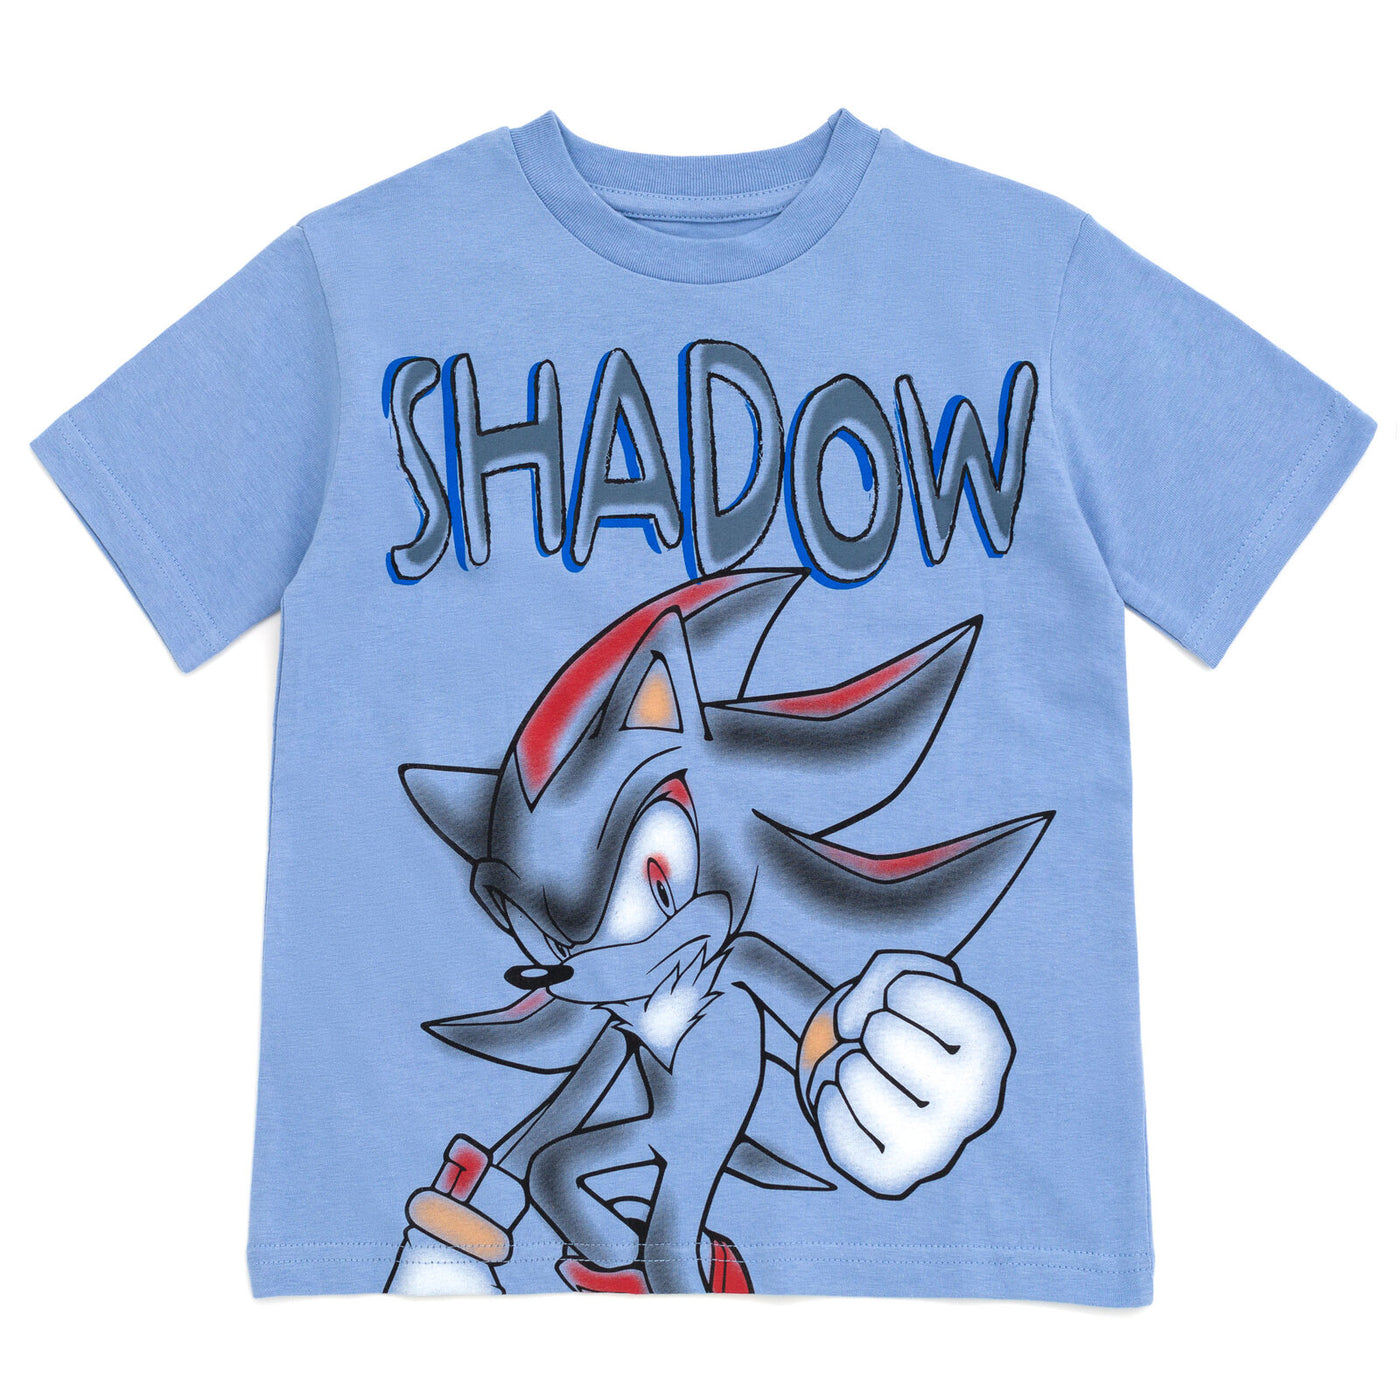 SEGA Sonic the Hedgehog Tails Shadow Knuckles 4 Pack T-Shirts